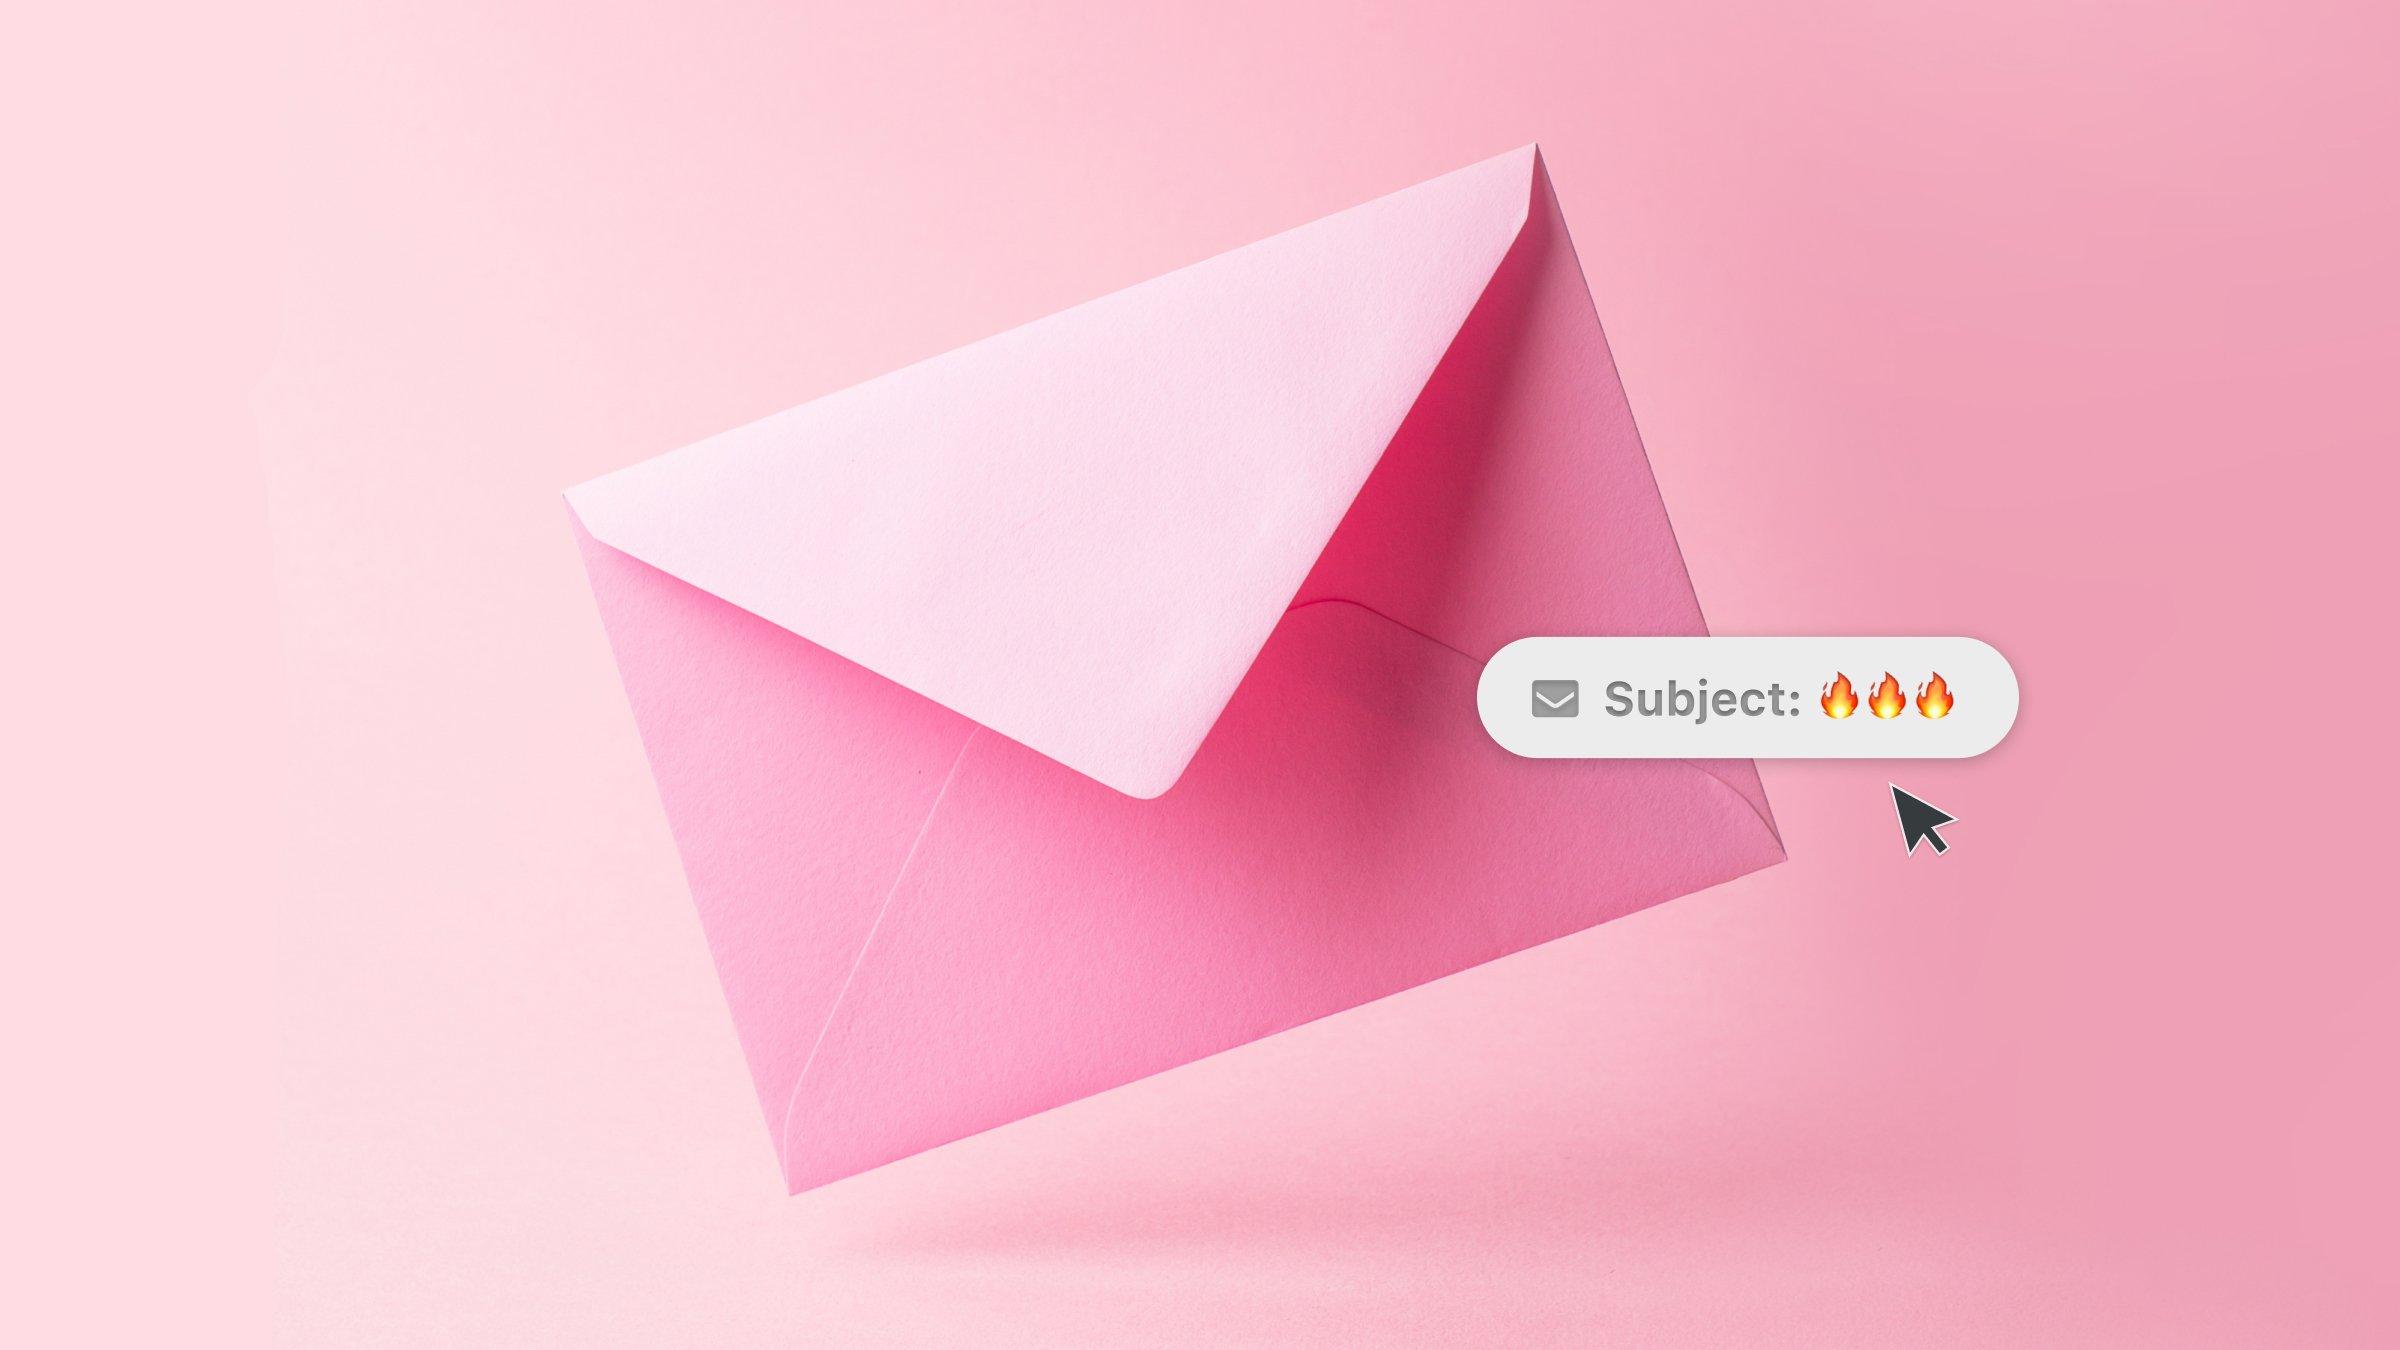 5 Ways to Make Your Email Subject Line More Clickable